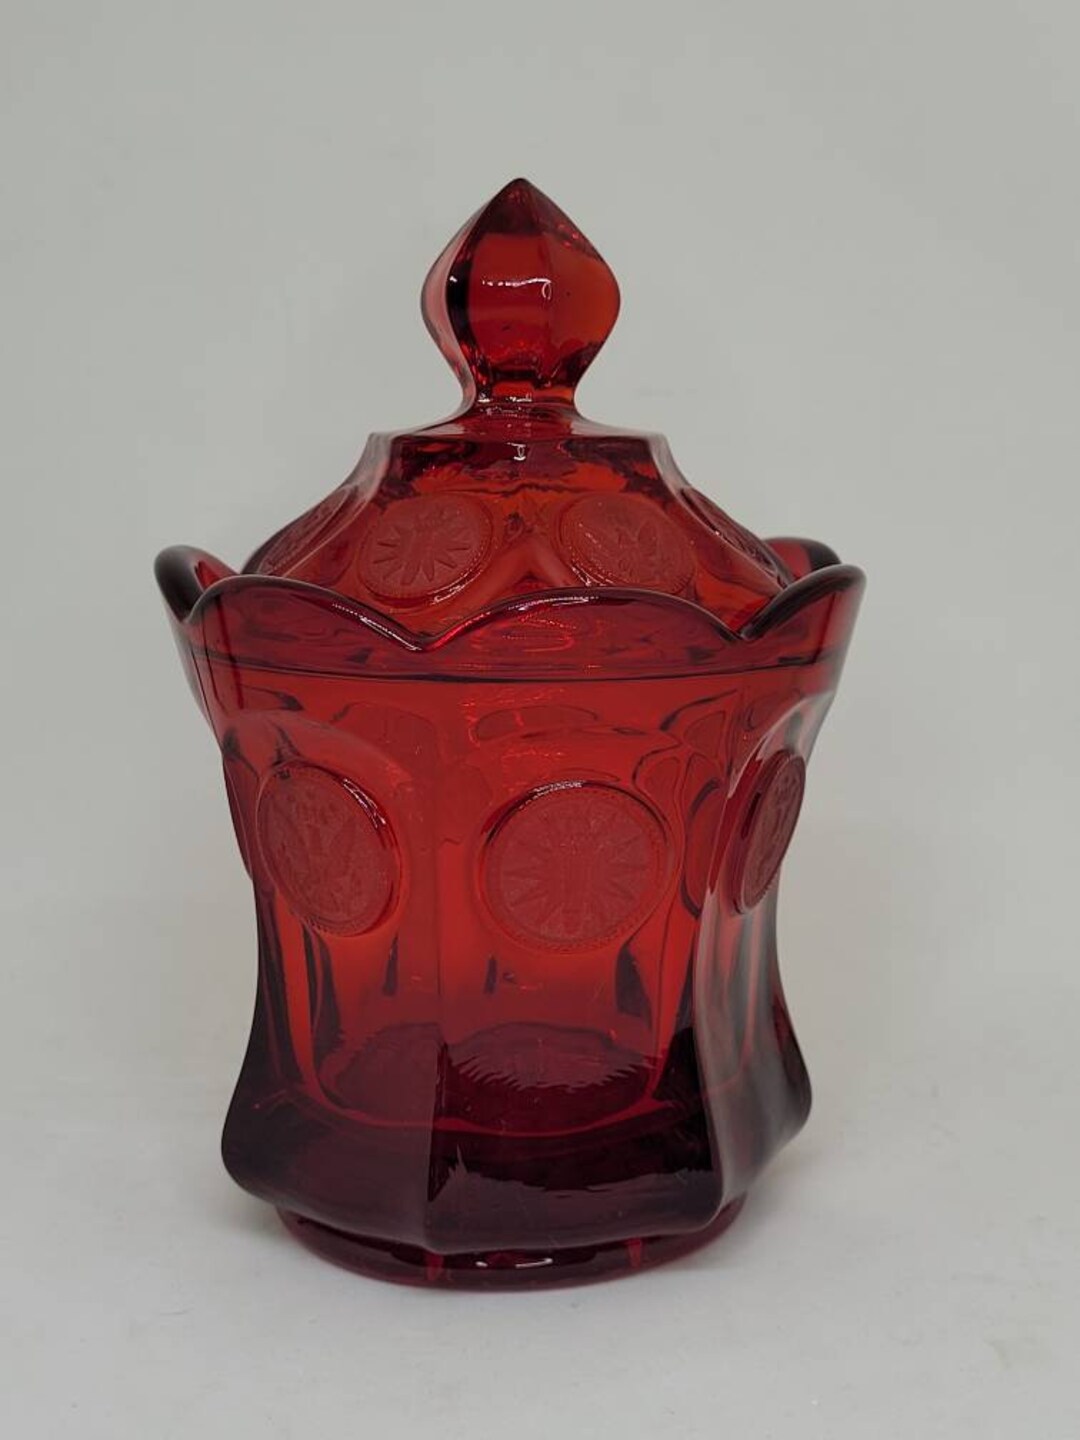 Vintage Fostoria Red Coin Dot Glass Lidded Candy Dish Sugar Bowl Collectible Glass Collectible